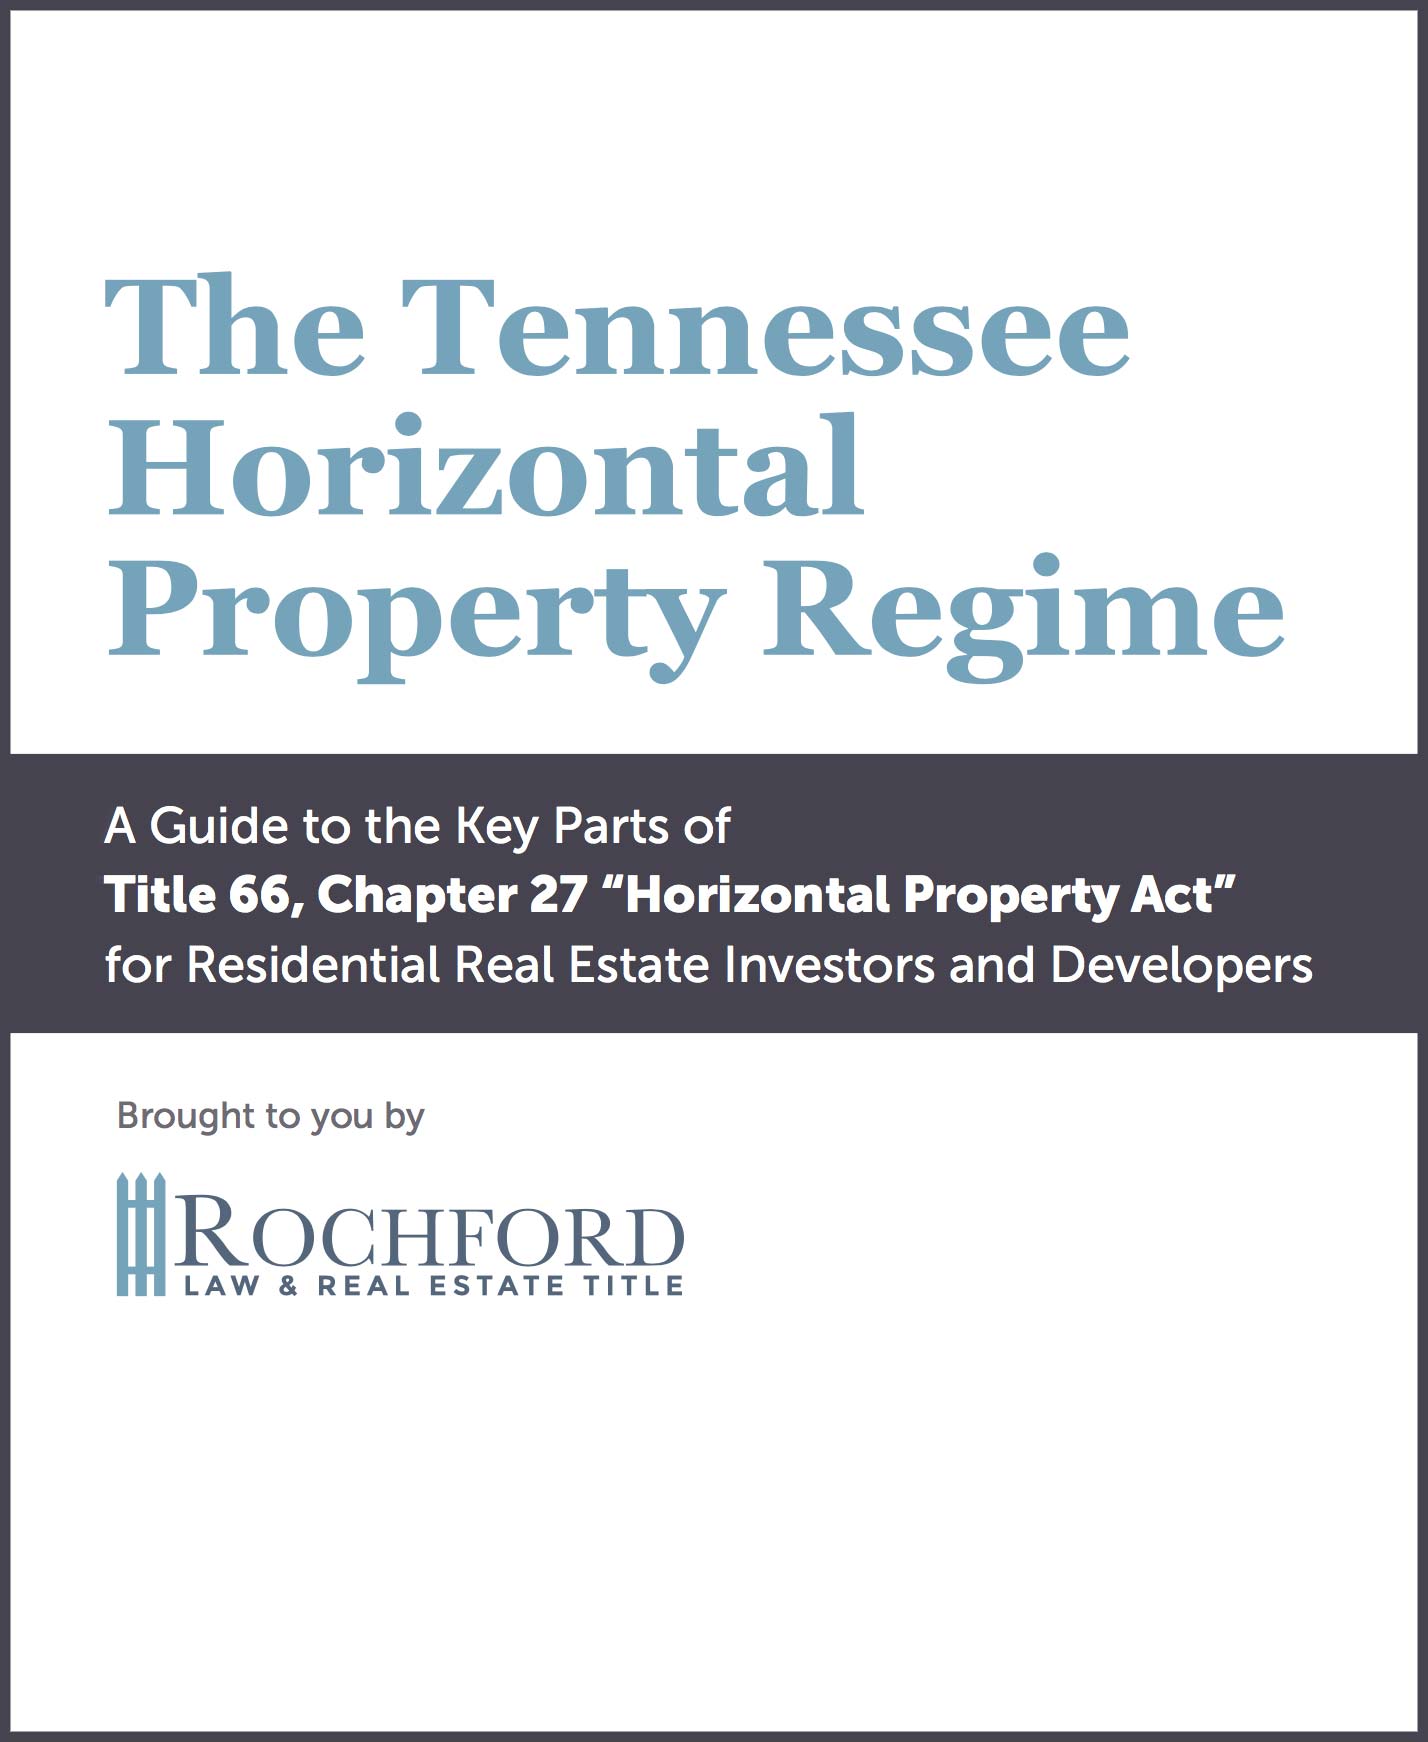 The Tennessee Horizontal Property Regime eBook